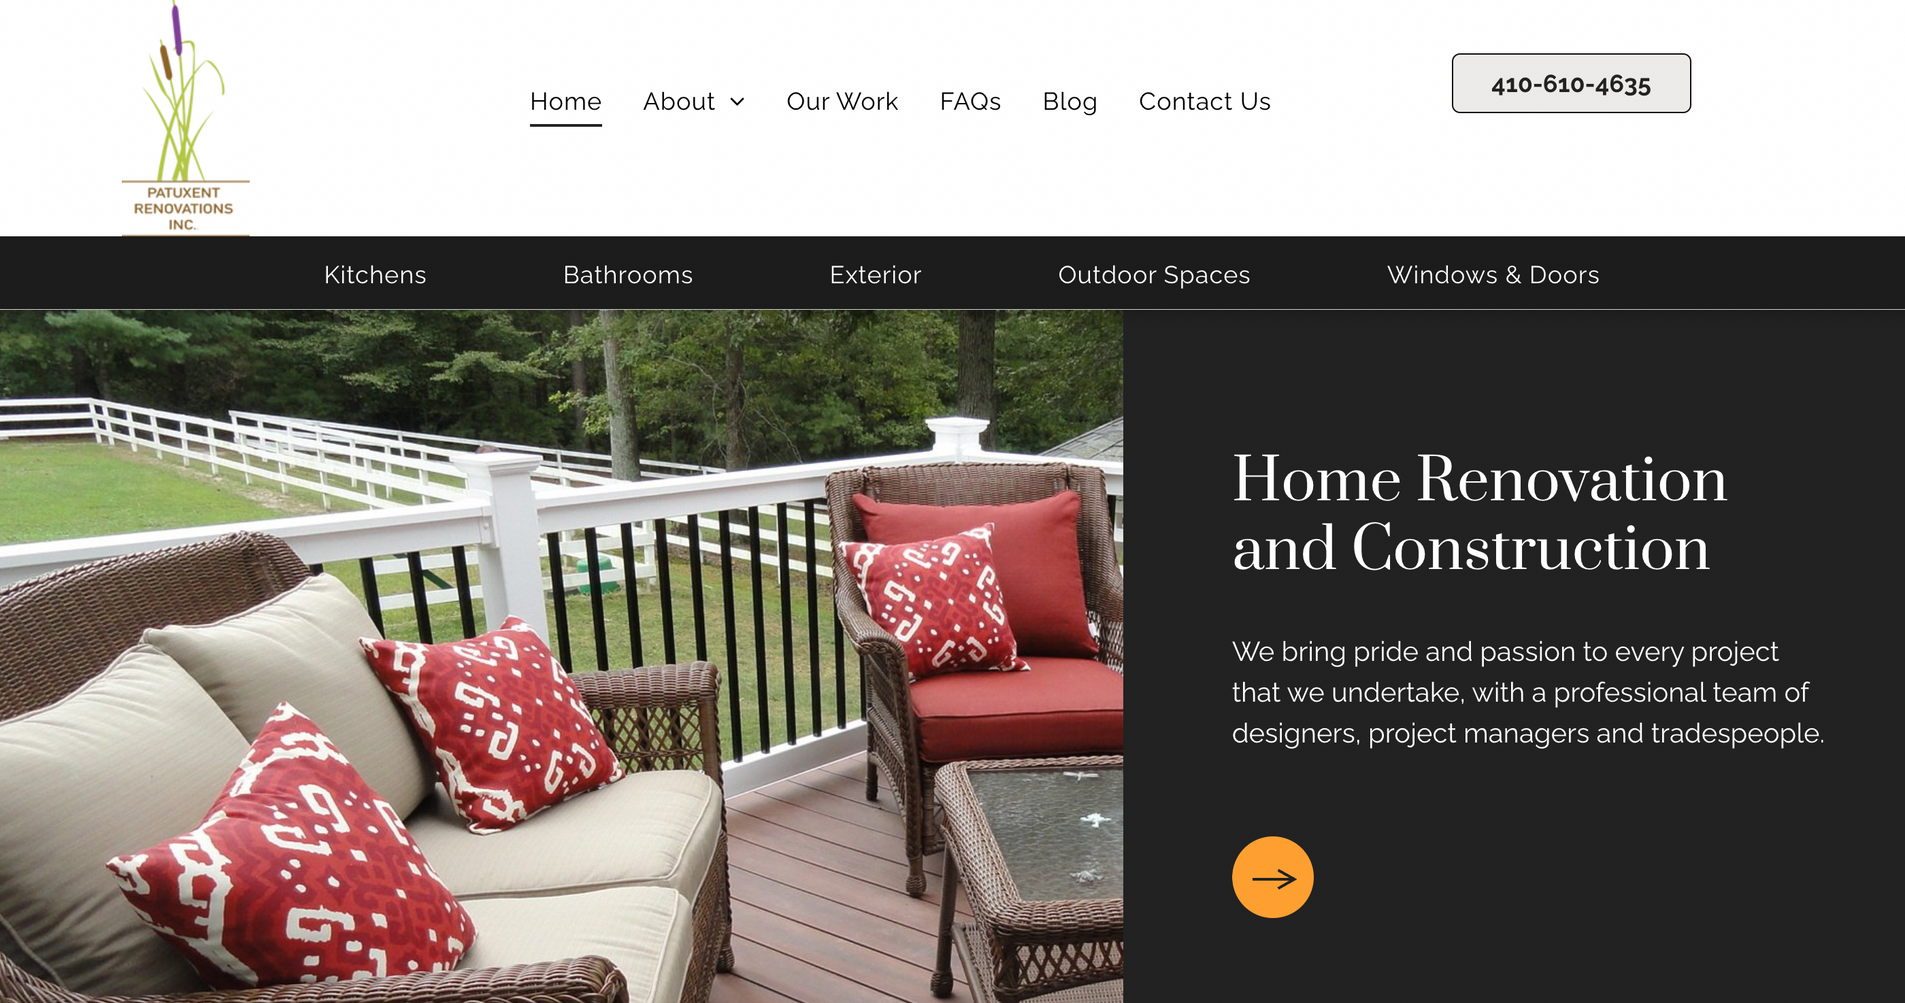 A screenshot of a website for home renovation and construction